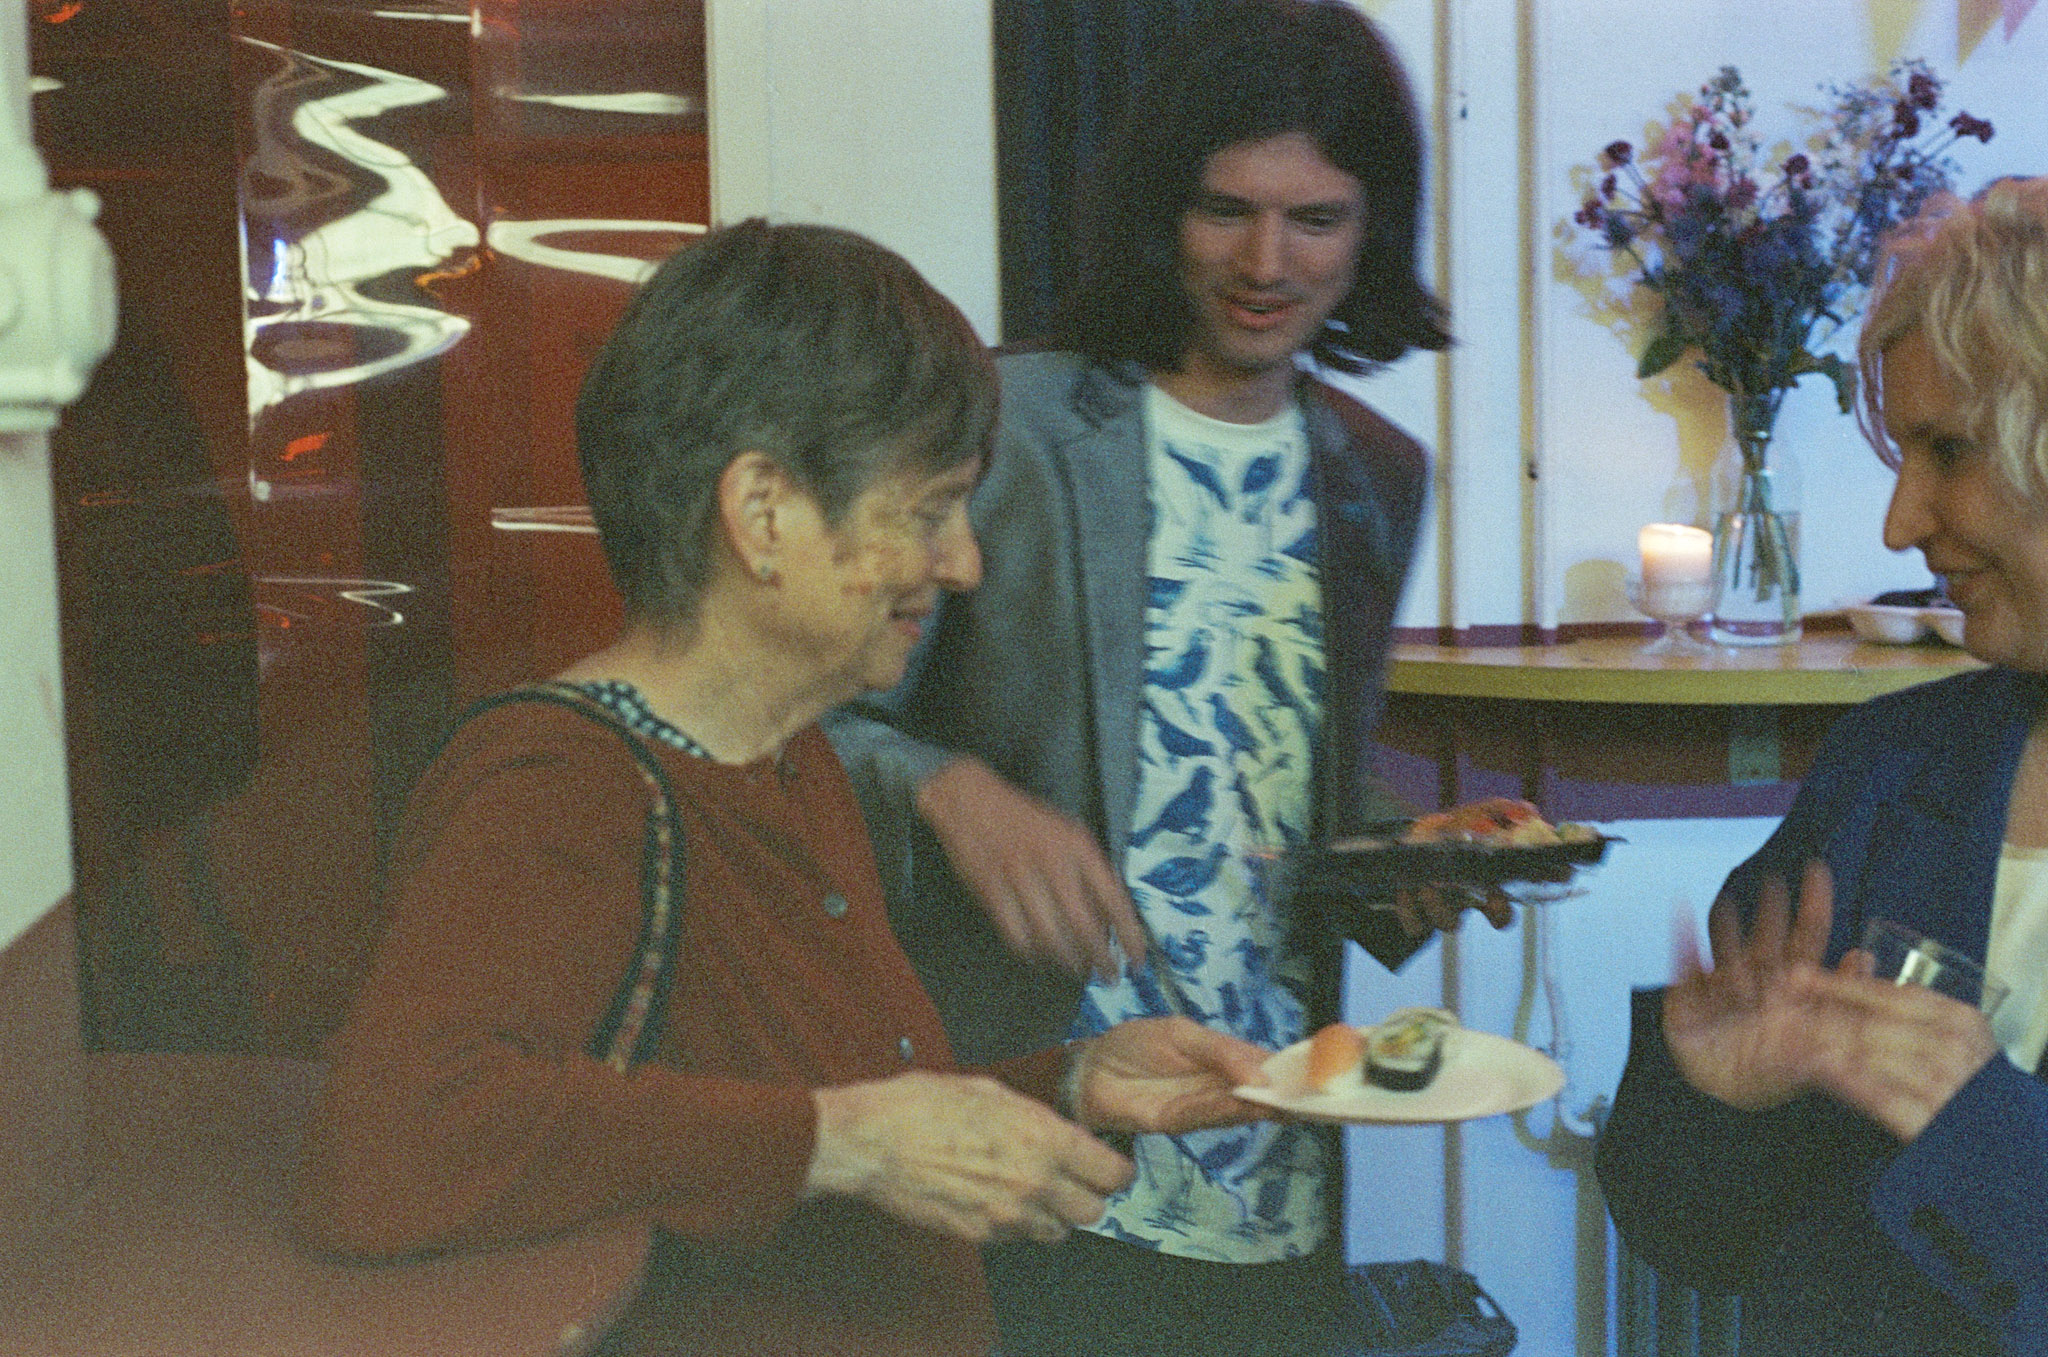 Bill's mom holds a plate of sushi; Eleni smiles to the right